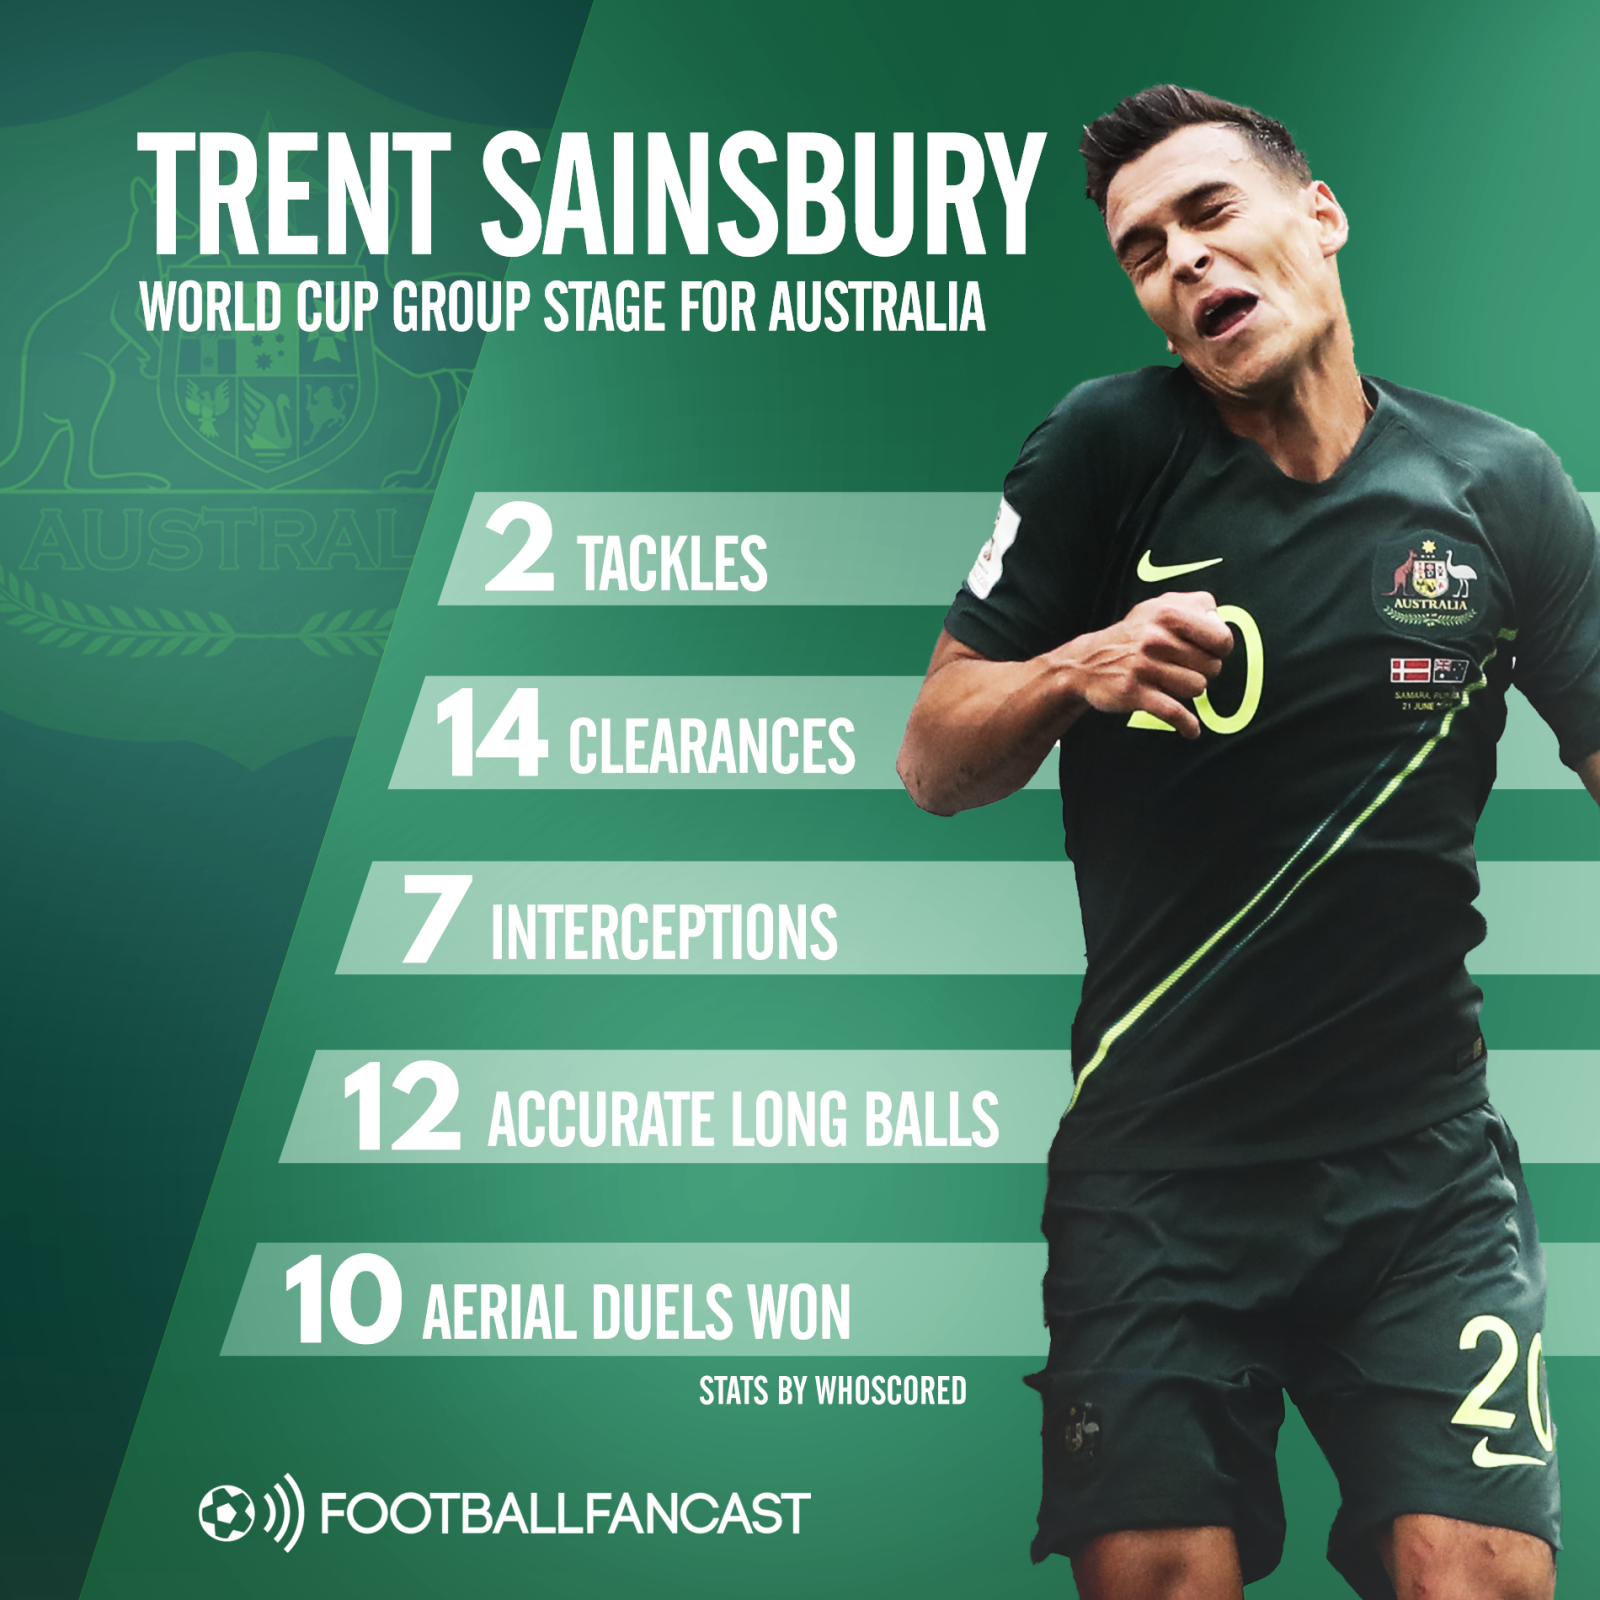 Trent Sainsbury stats for Australia at World Cup